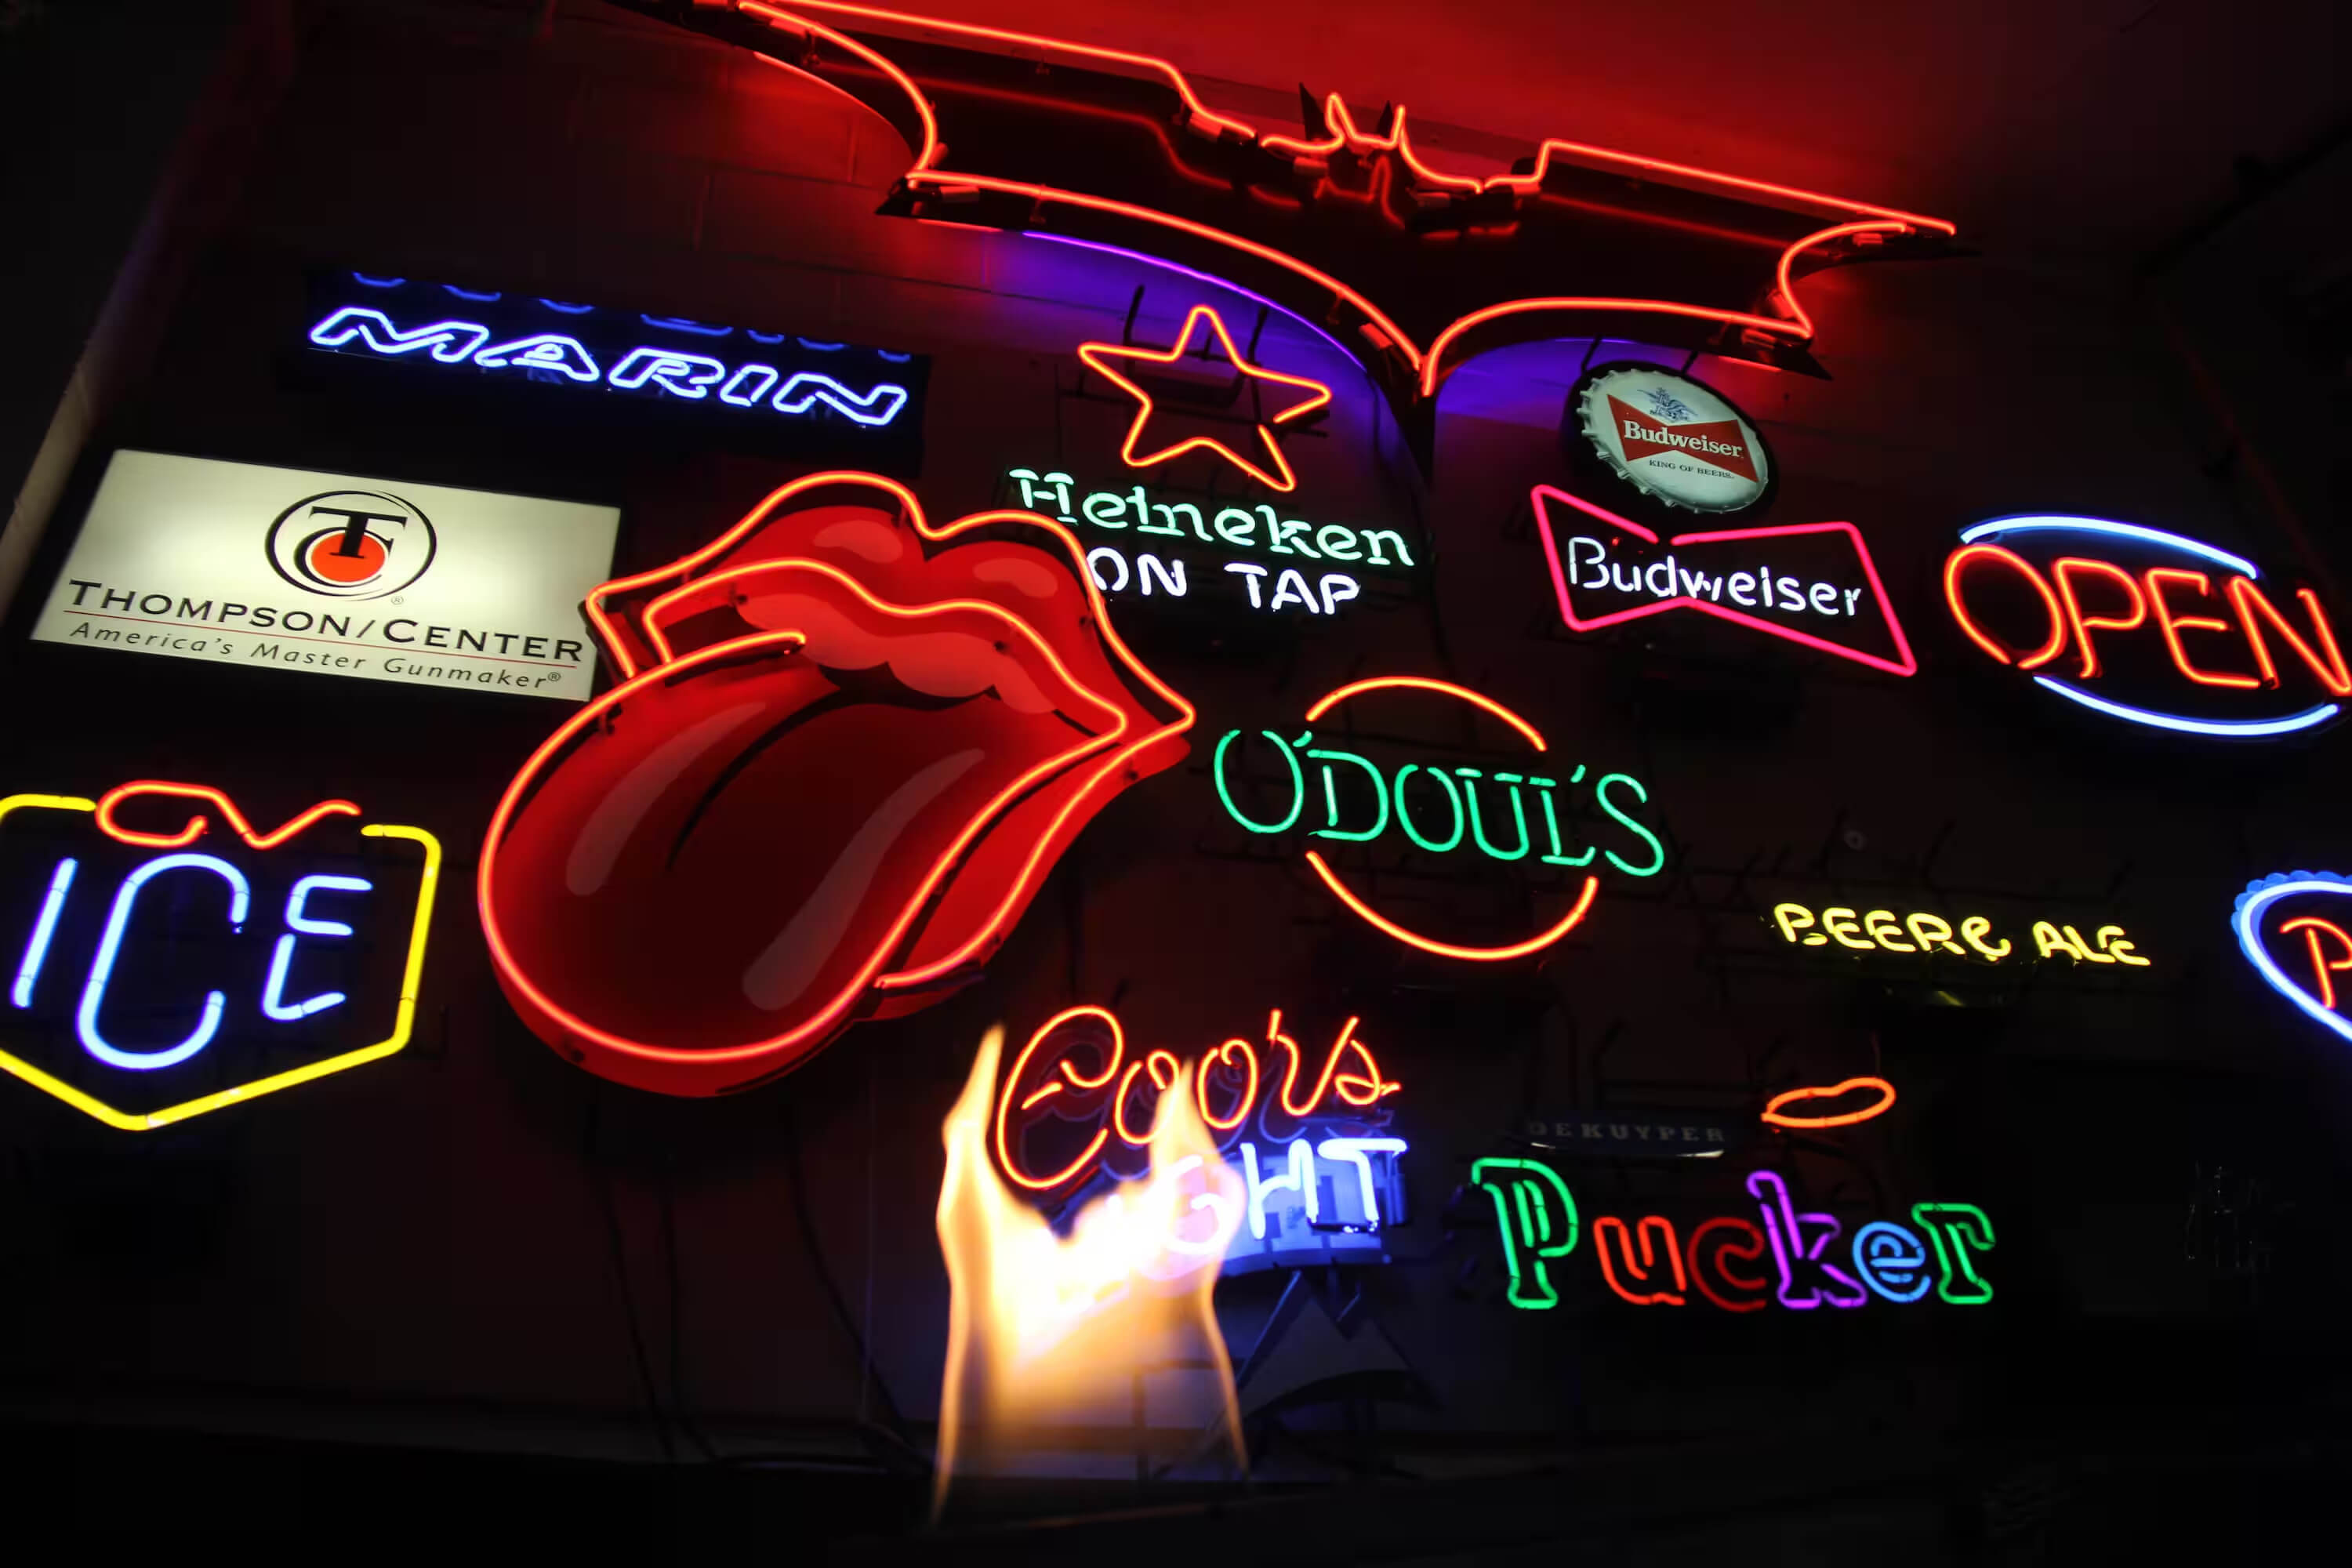 Want a unique sign? Check out this custom neon signs hub!